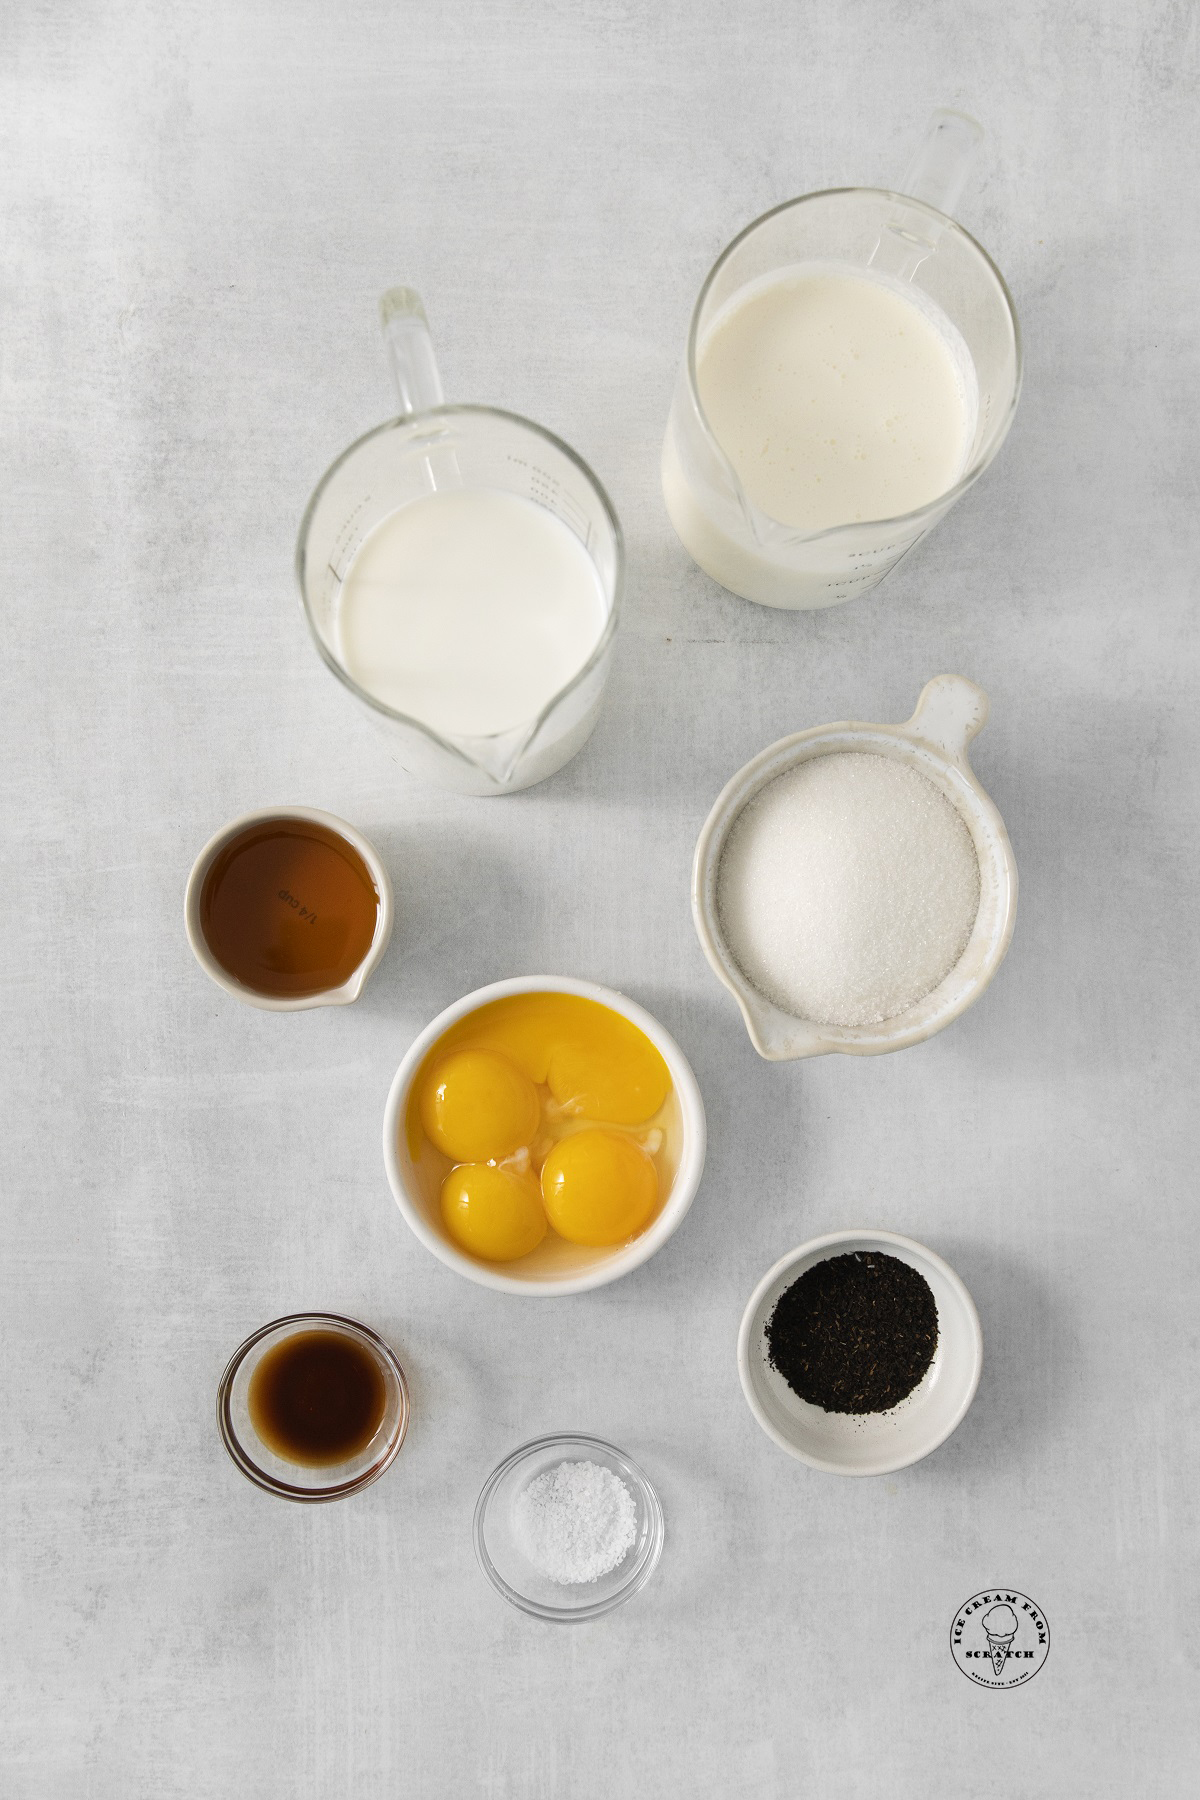 The ingredients required to make earl grey tea flavored ice cream, measured into separate bowls, arranged on a counter, and viewed from overhead.